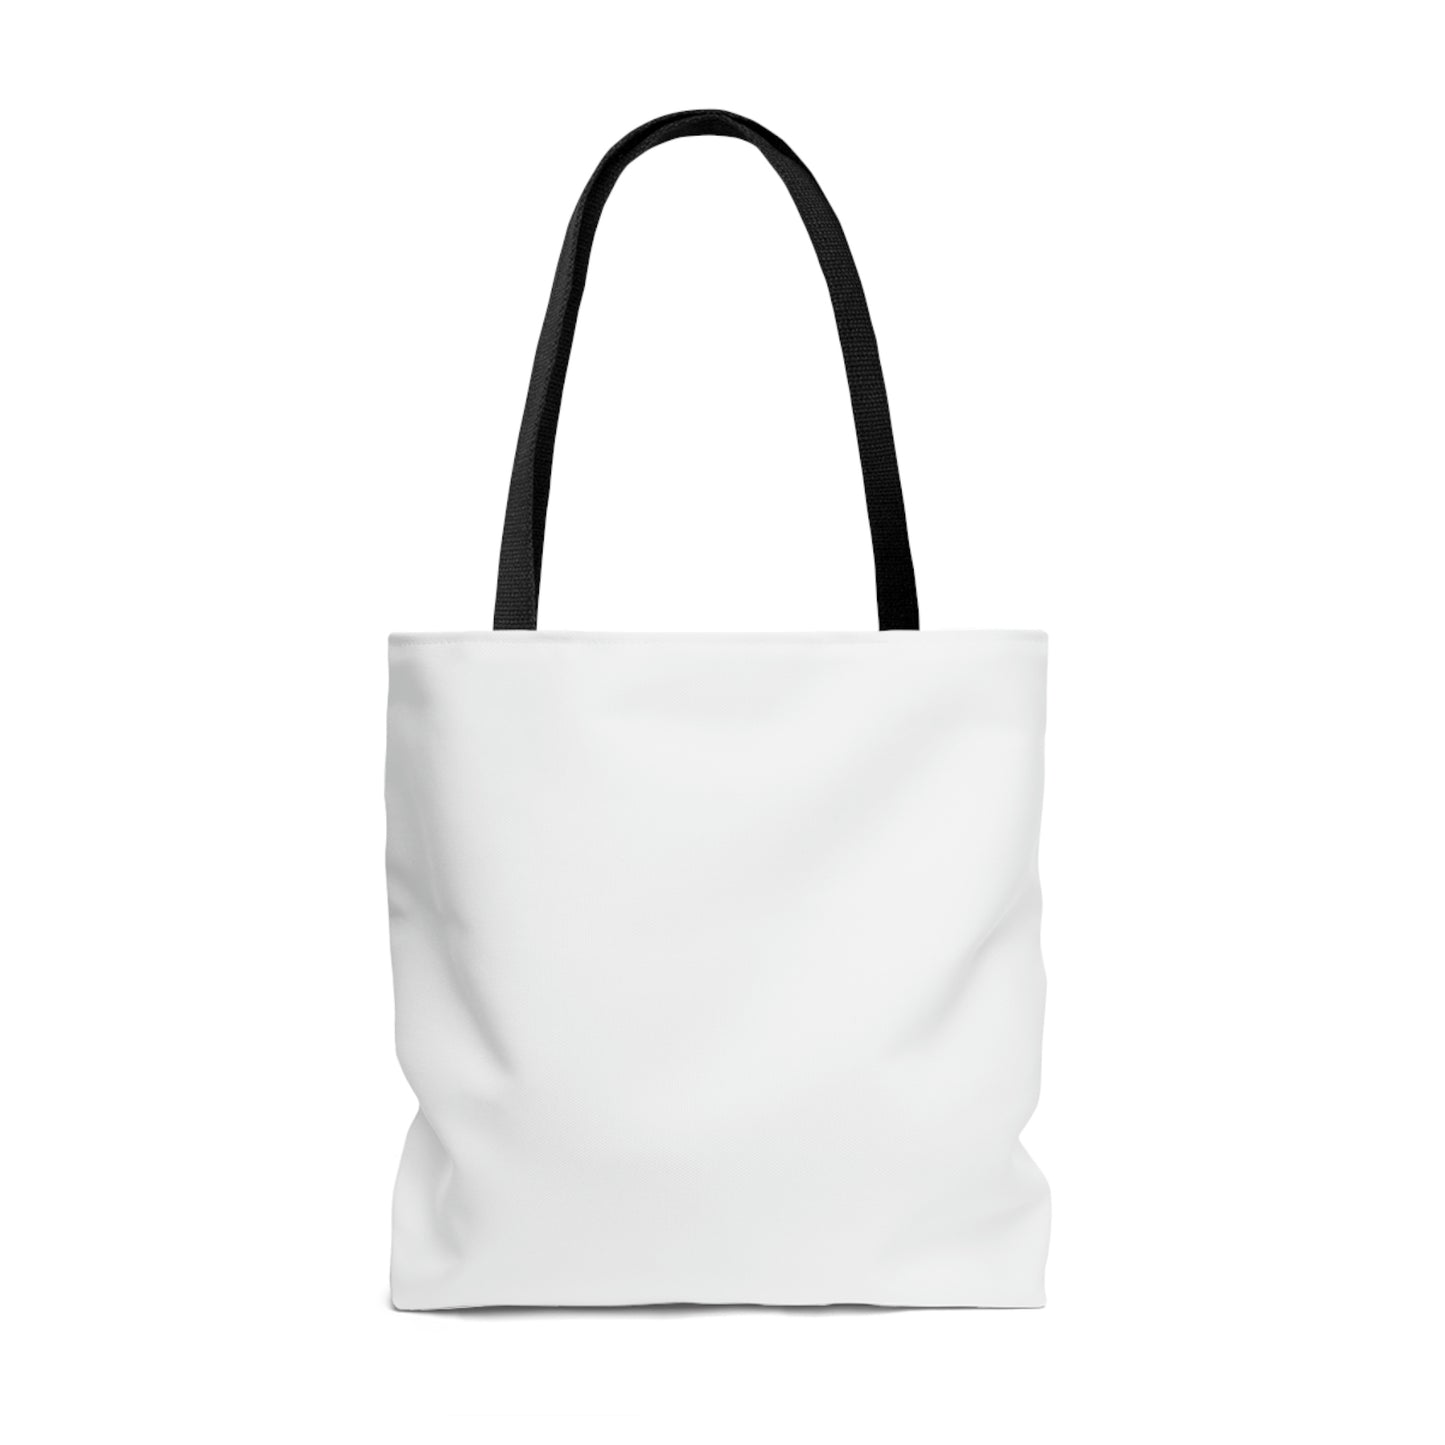 "Mistakes Allow Thinking to Happen Tote Bag